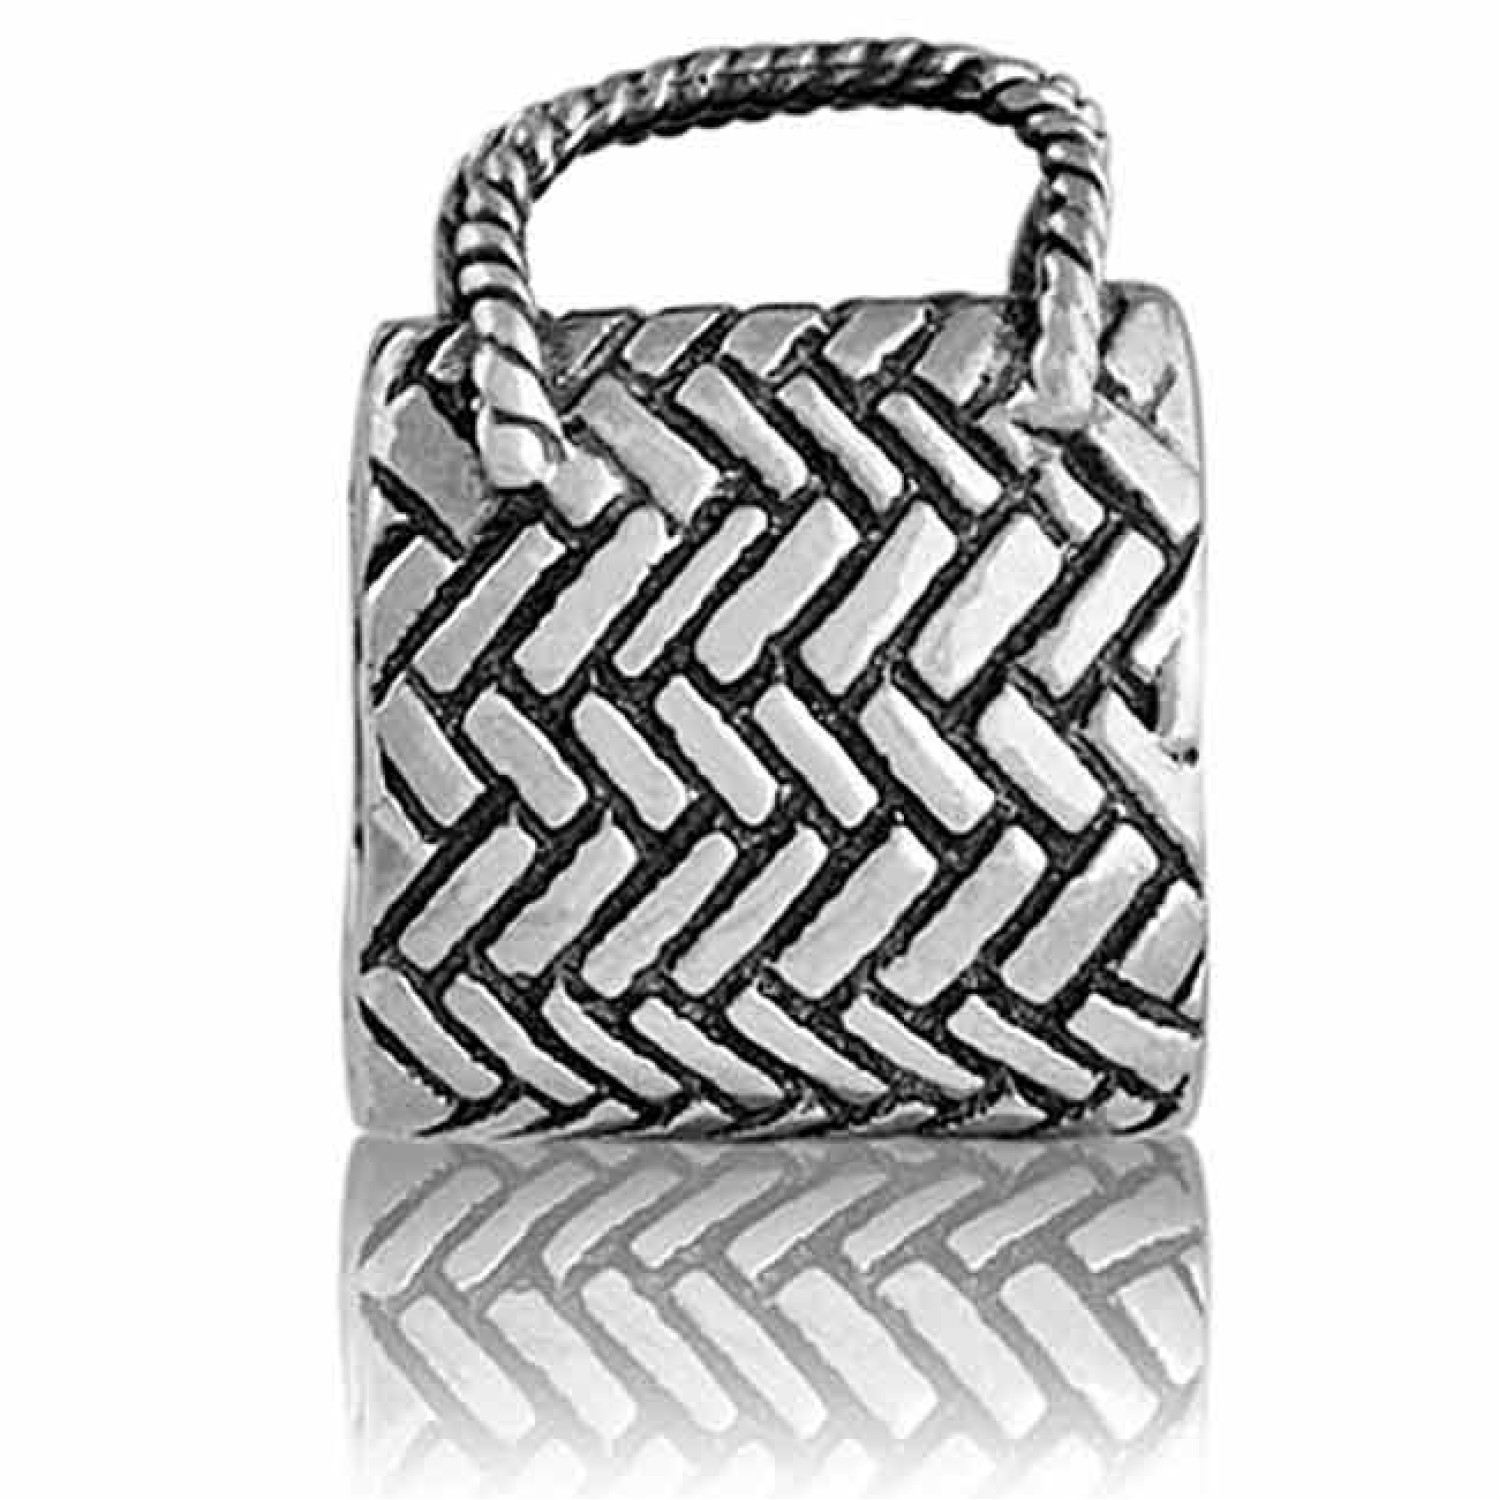 LK028 Evolve s NZ Kete Treasures. LK028 Evolve Silver Charms NZ Kete Treasures The kete is a traditional Maori woven basket, used to keep treasures safe and to gather food.  Woven from flax, the kete is both decorative and practical and has remained @chri